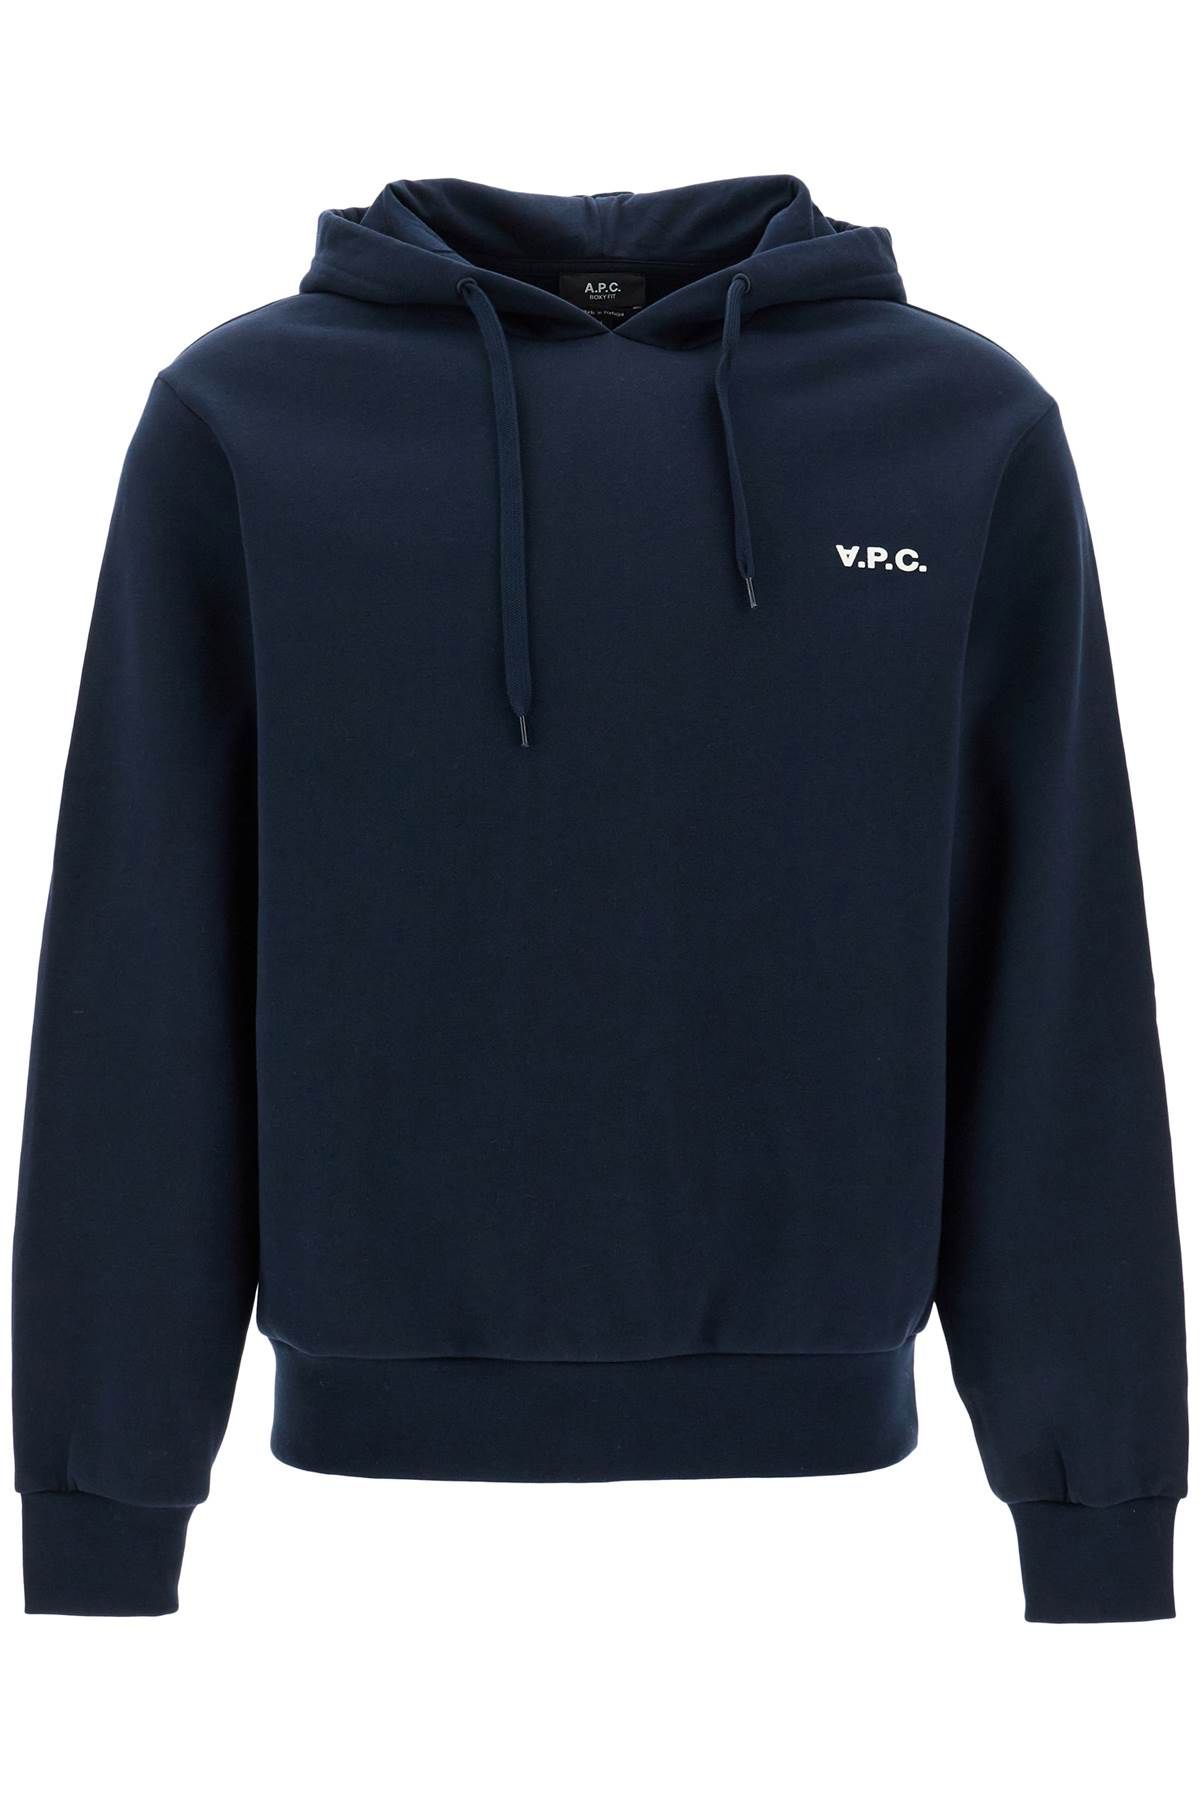 A.P.C. A. P.C. hooded sweatshirt with flocked